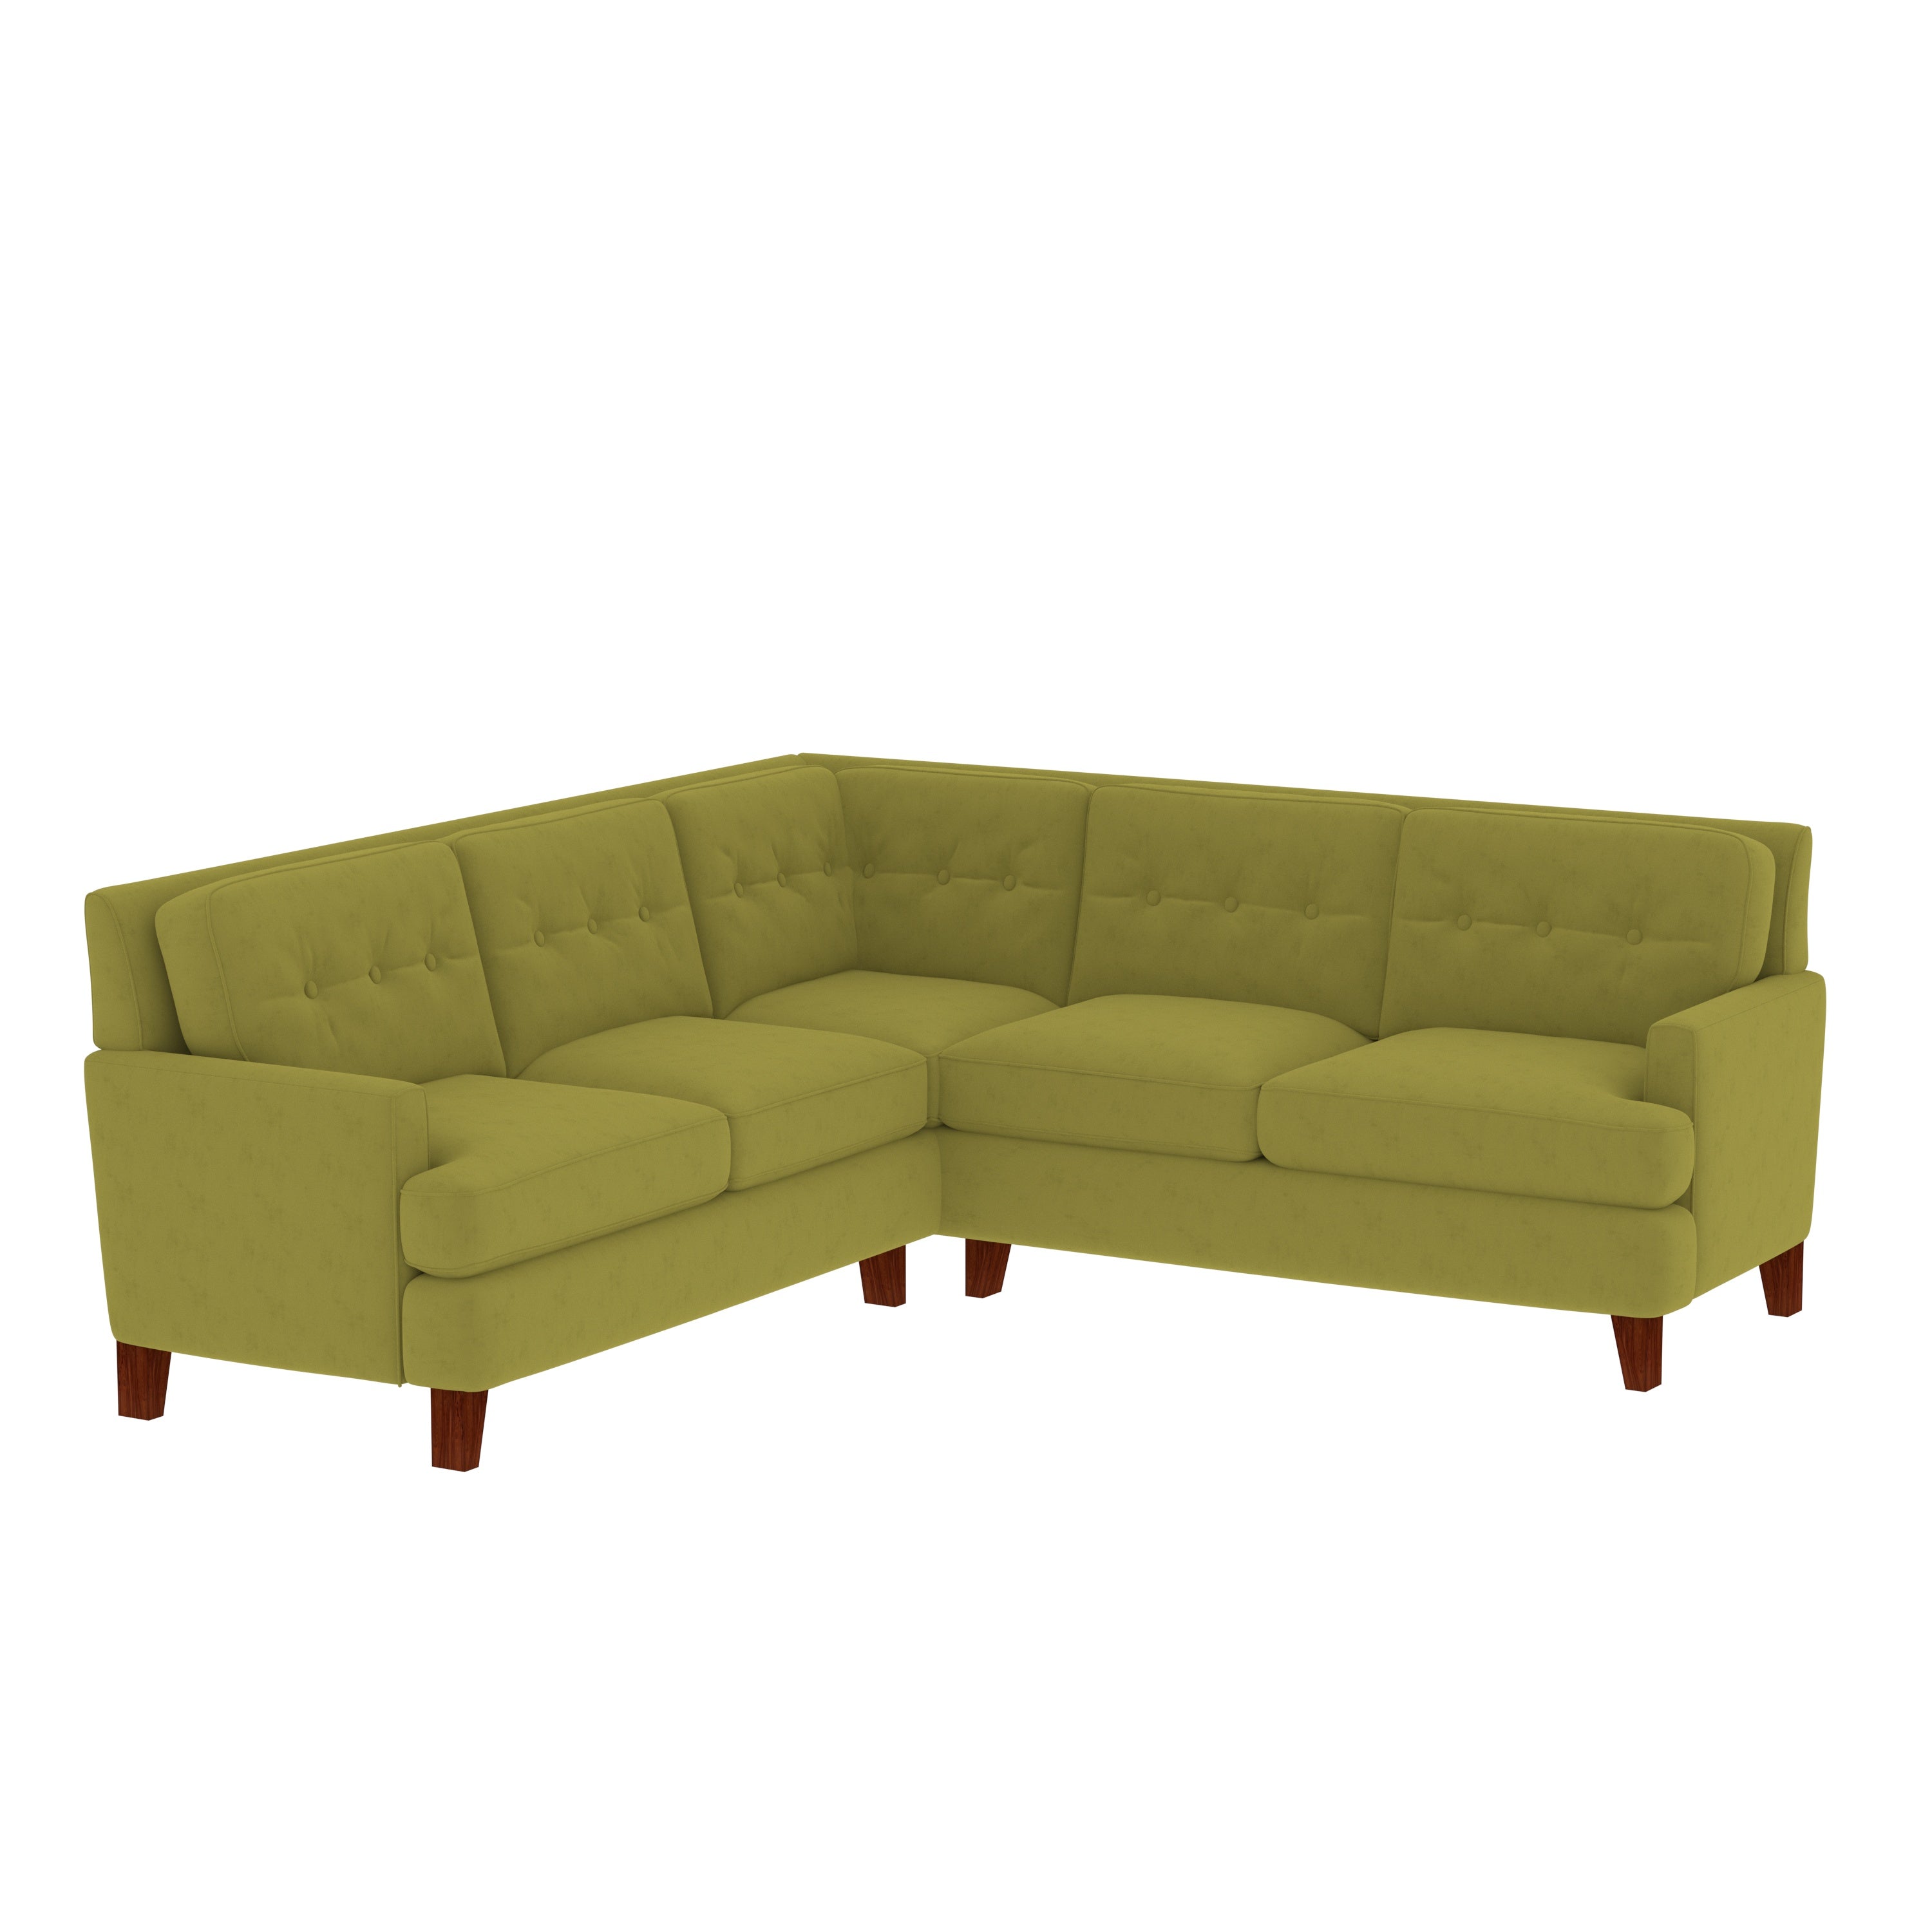 Olive Green Pastel Coloured with Premium Comfort L Shaped 4 Seater Sofa Set for Home Sofa